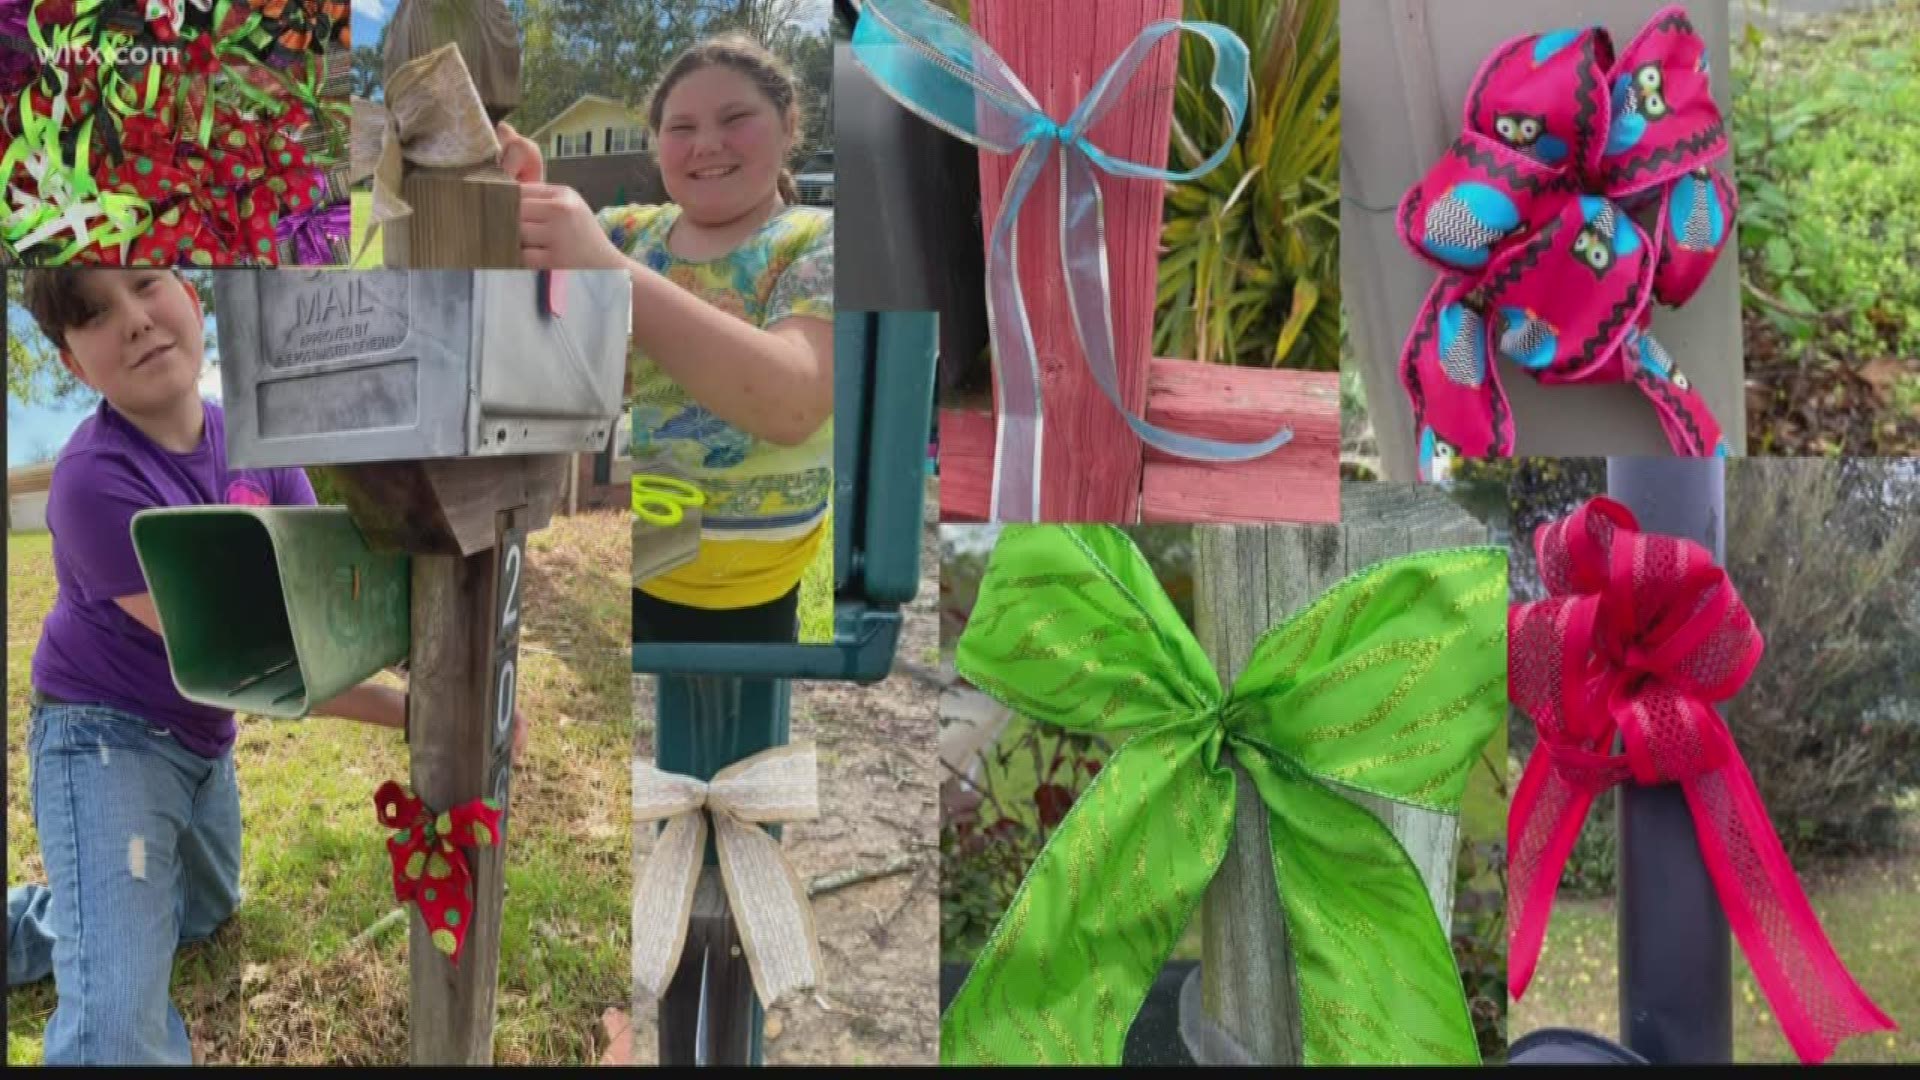 One Irmo woman trying to bring a smile to the neighborhood one bow at a time